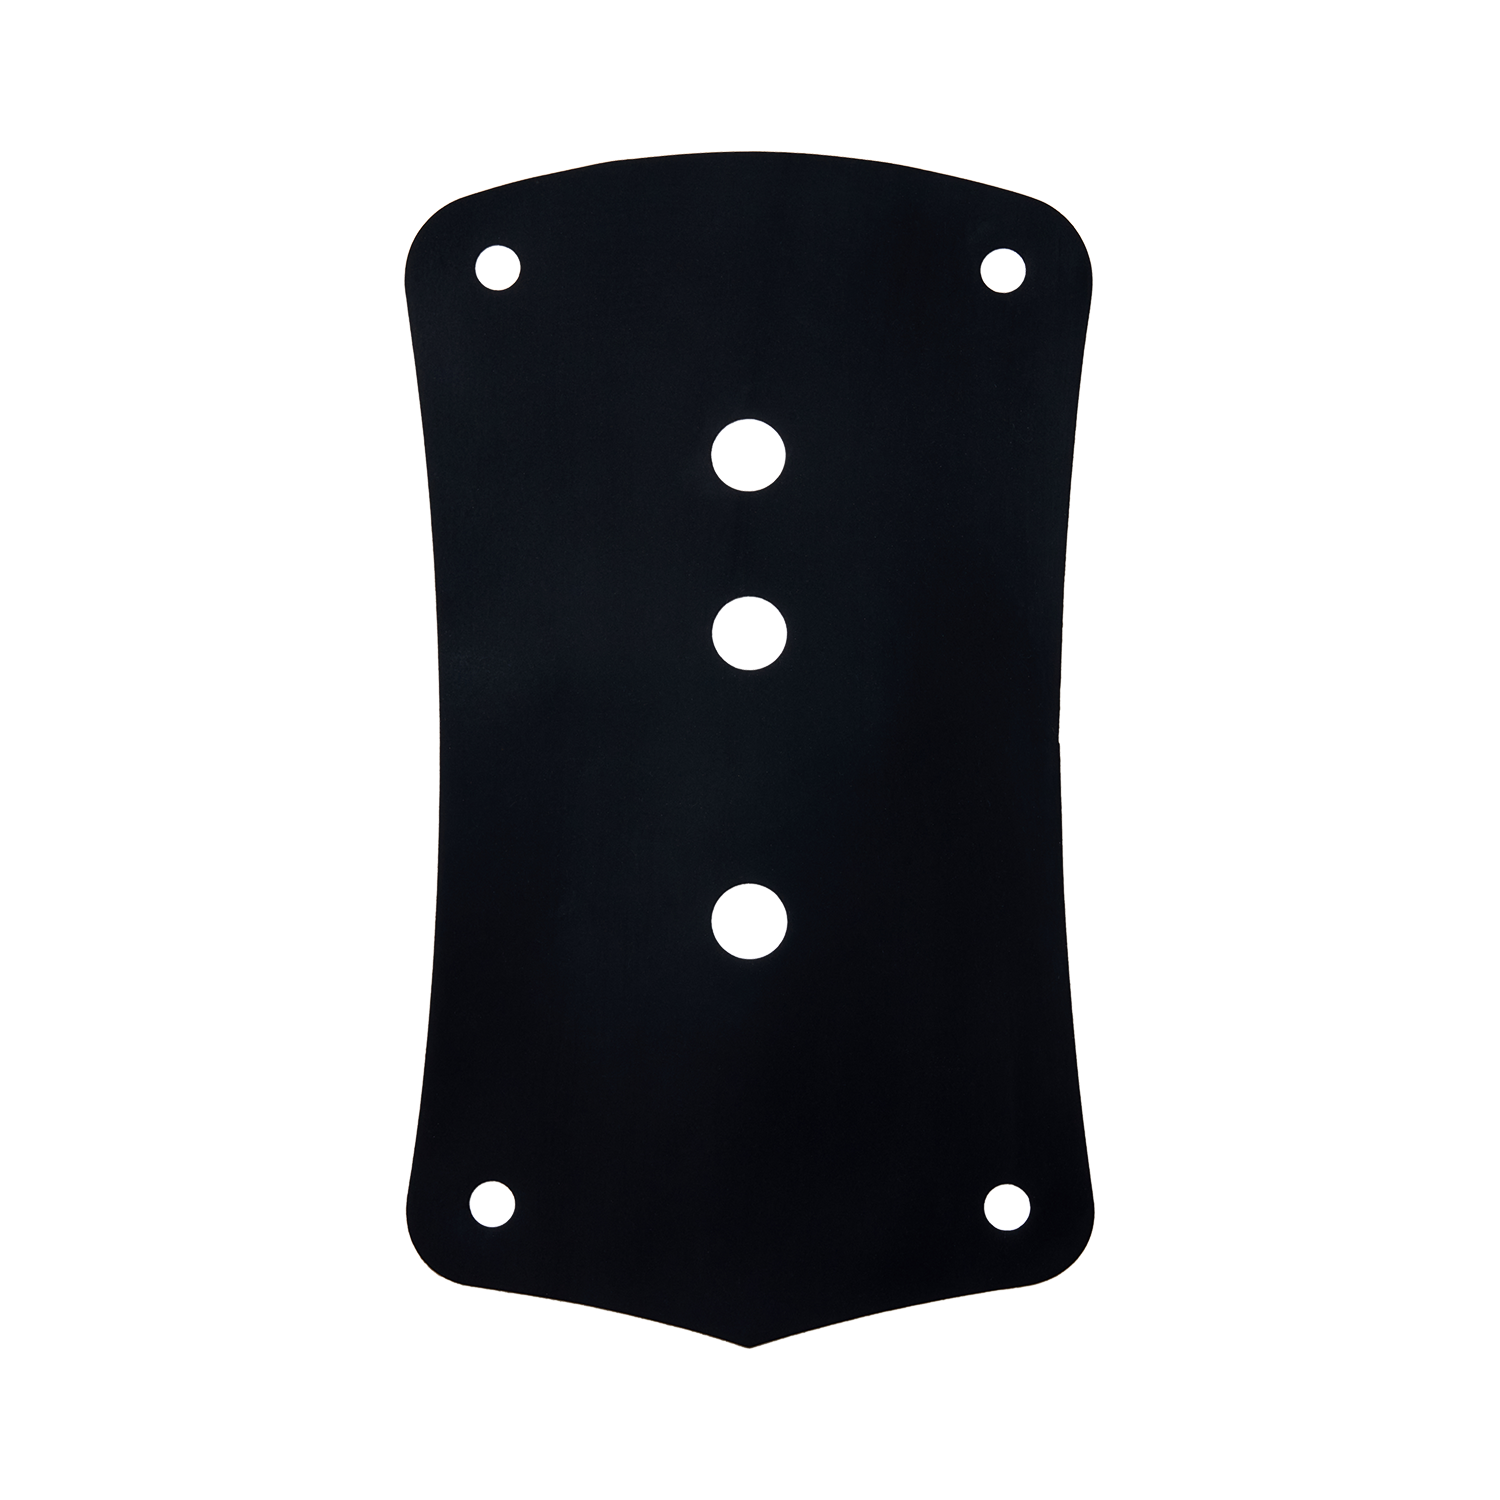 GONG | Foil Allvator Silicone Top Plate Cover